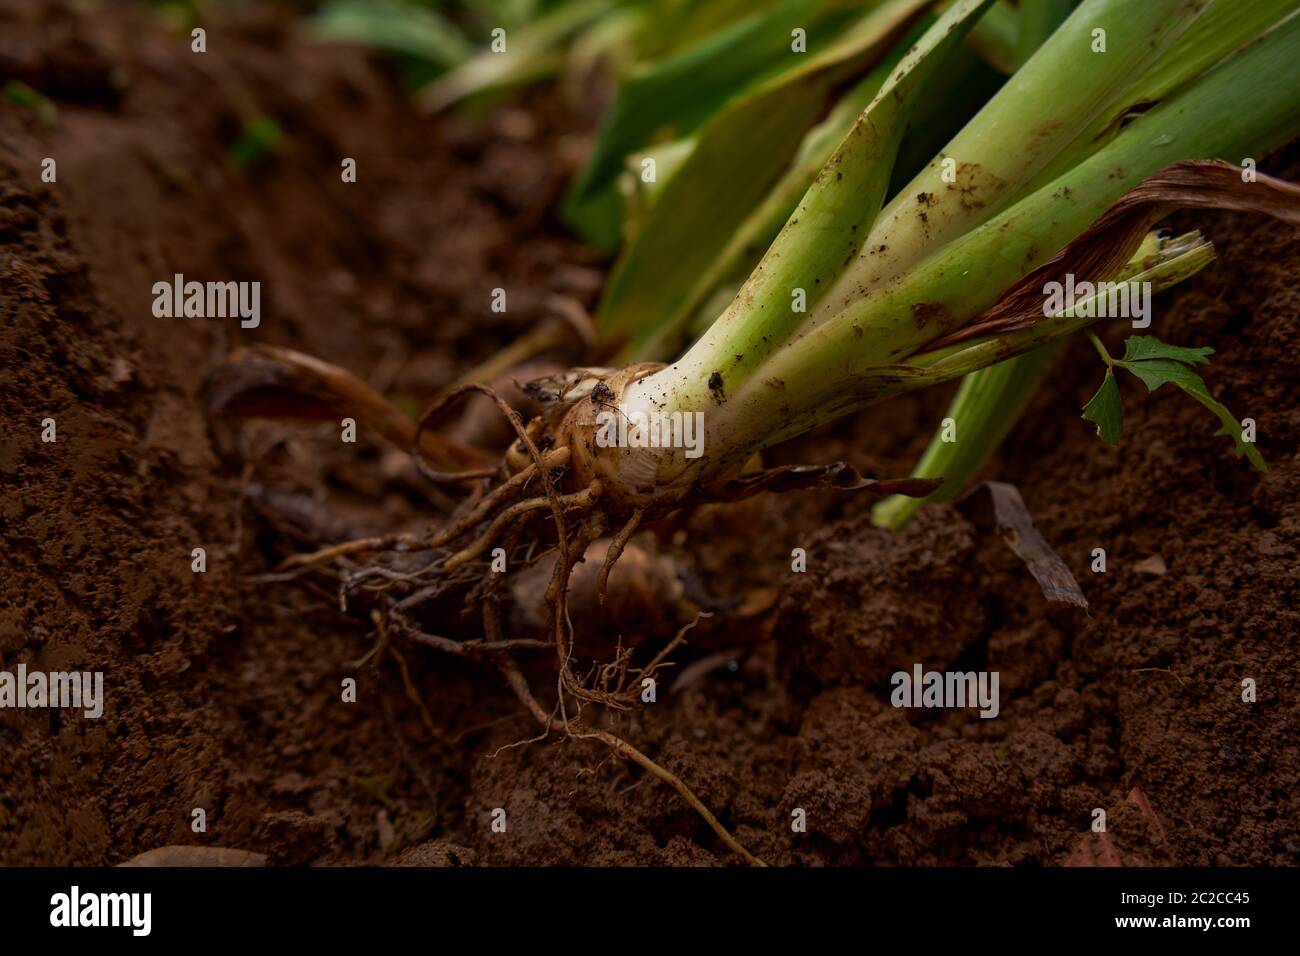 Green plant with roots ready for planting Stock Photo